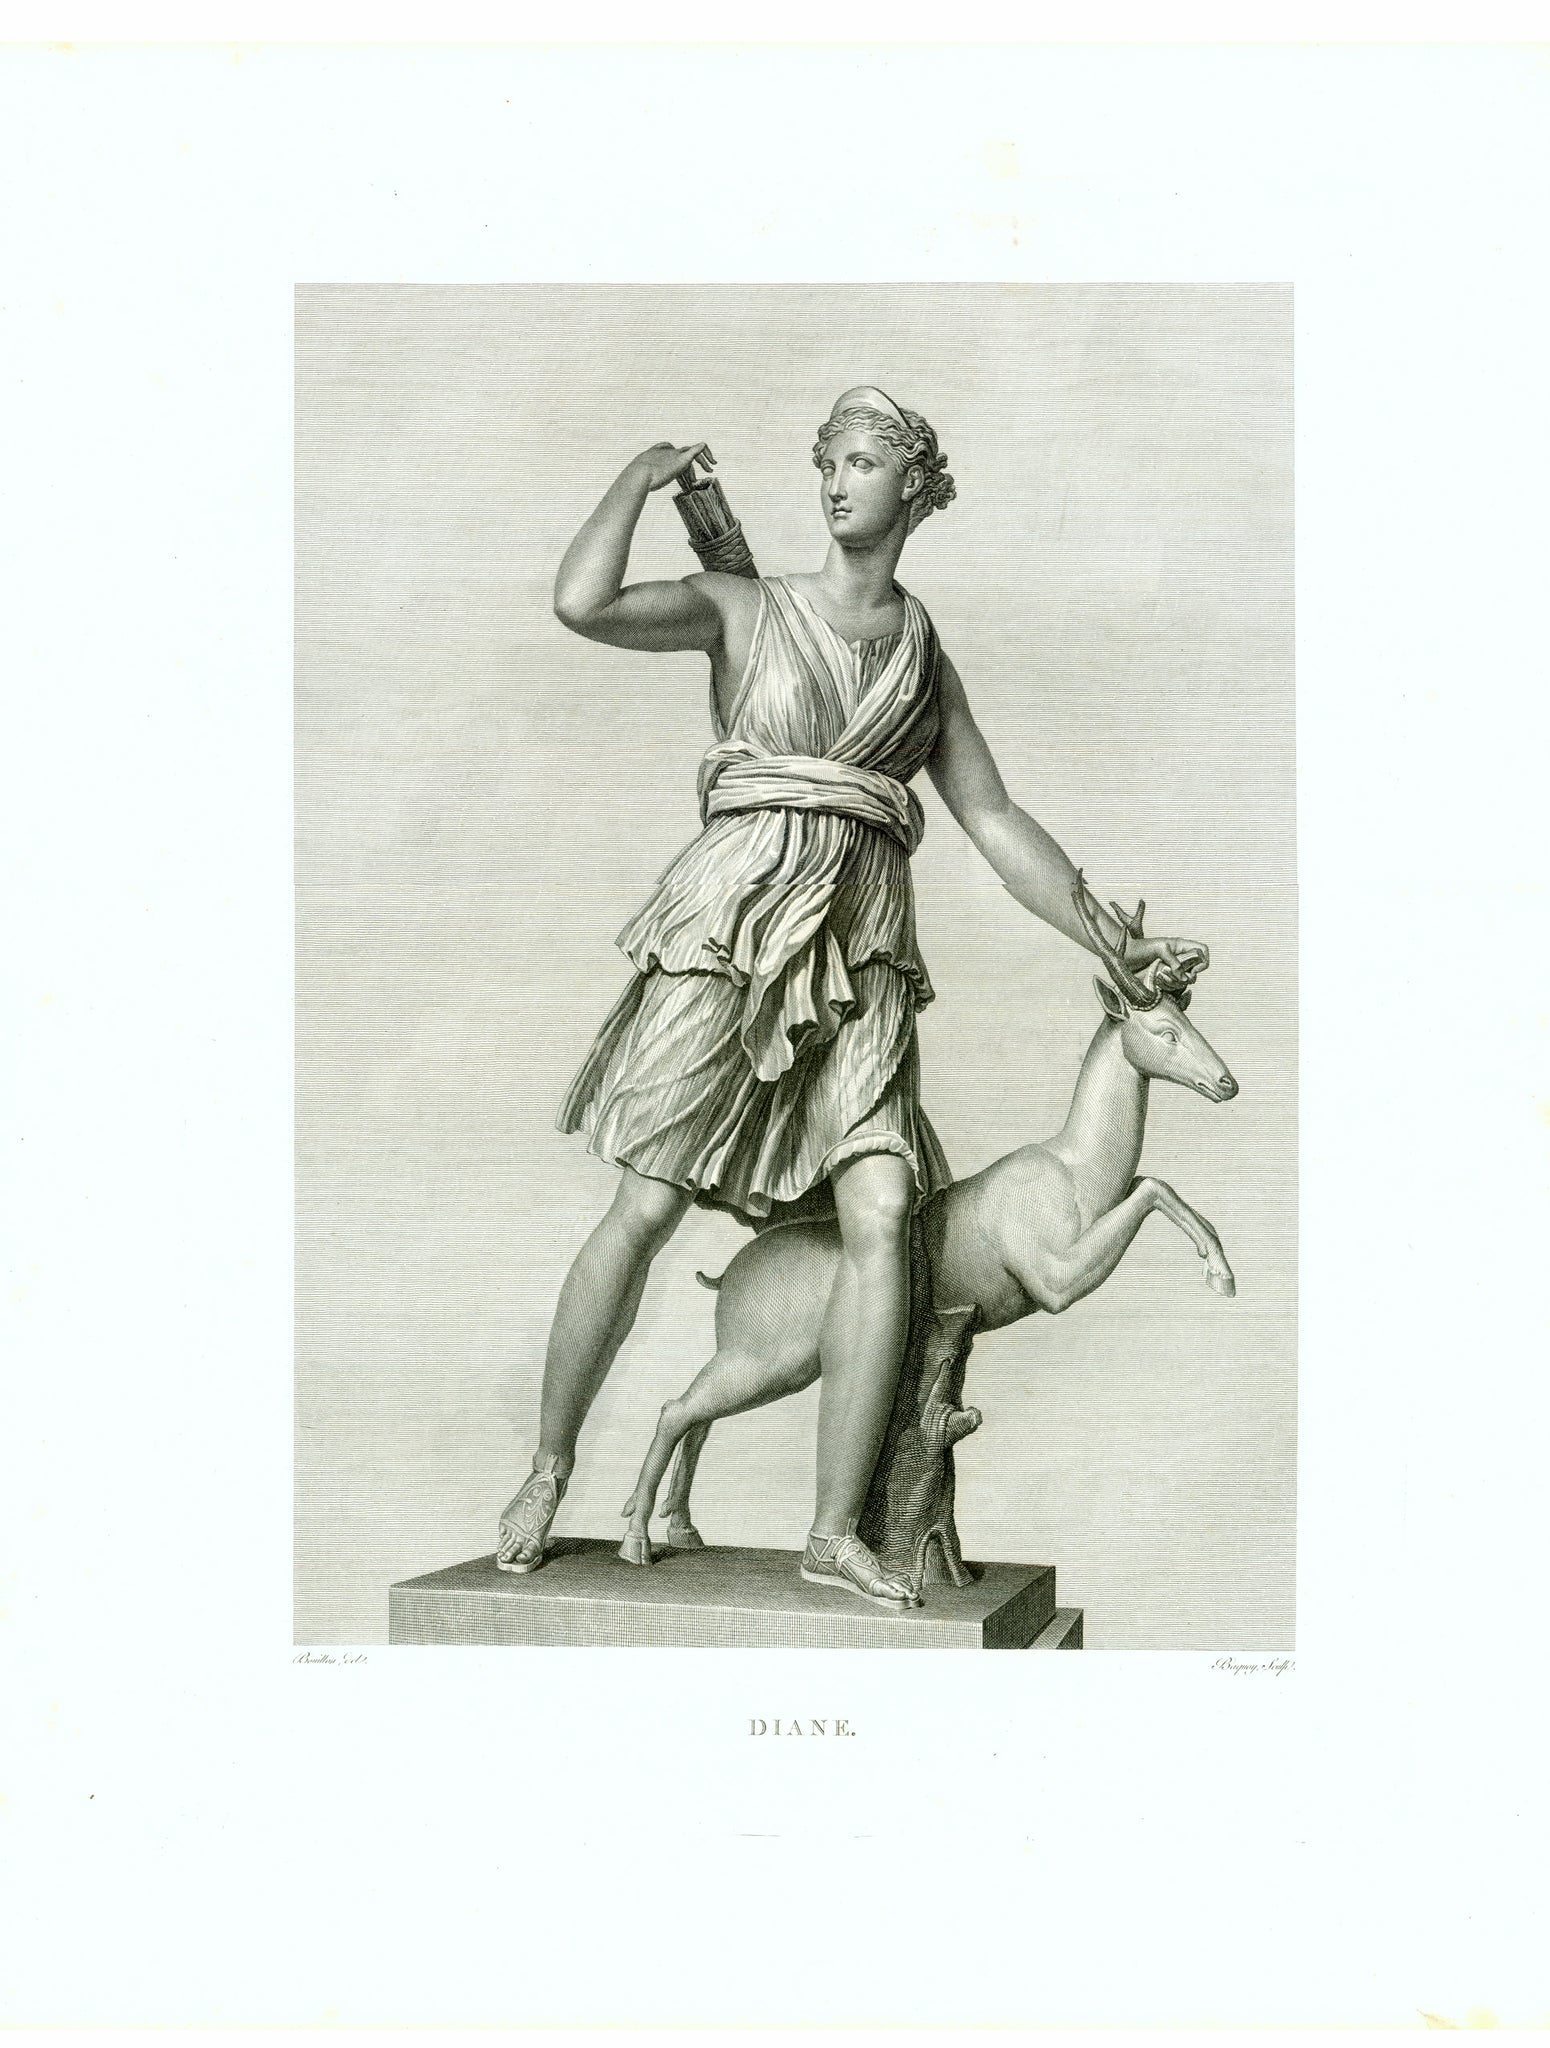 "Diane"  Copper etching by Baquoy  After the drawing by Bouillon  Published in "Musee Royal" by Henri Laurent  Paris, 1816  Roman Goddess of the Hunt ( Greek mythology: Artemis)  This statue, in the possession of the Louvre in Paris, has various names:  Diane of Versailles - Diana Huntress - Diana with a Doe - Diane a la biche. Diana, Artemis